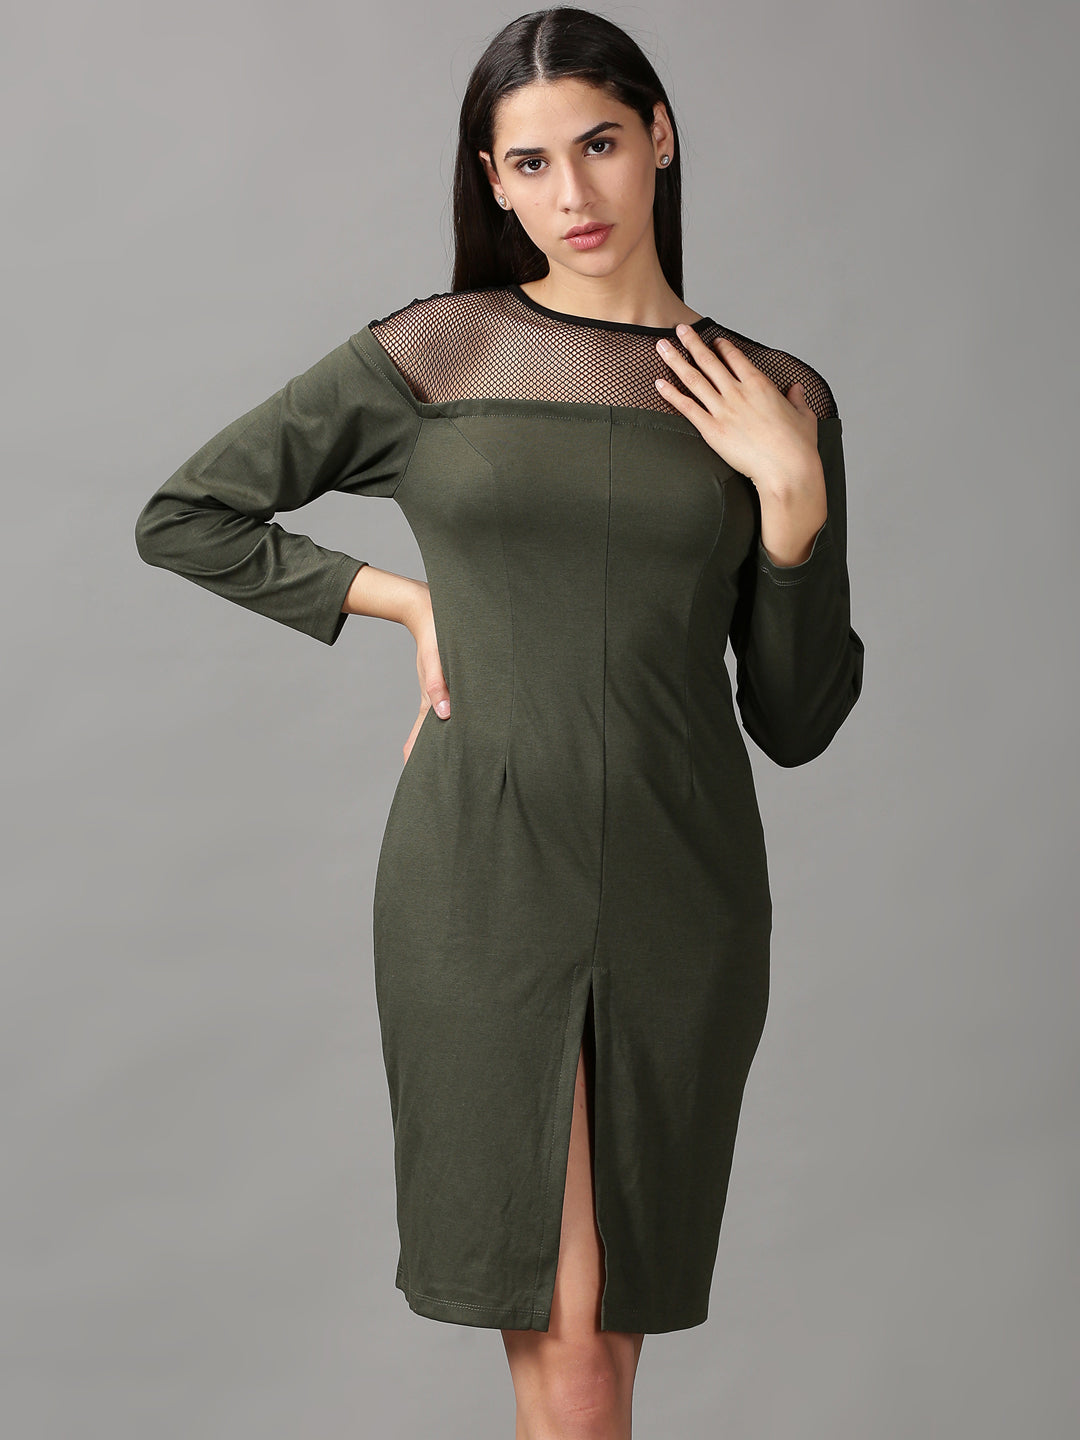 Women's Olive Solid Bodycon Dress